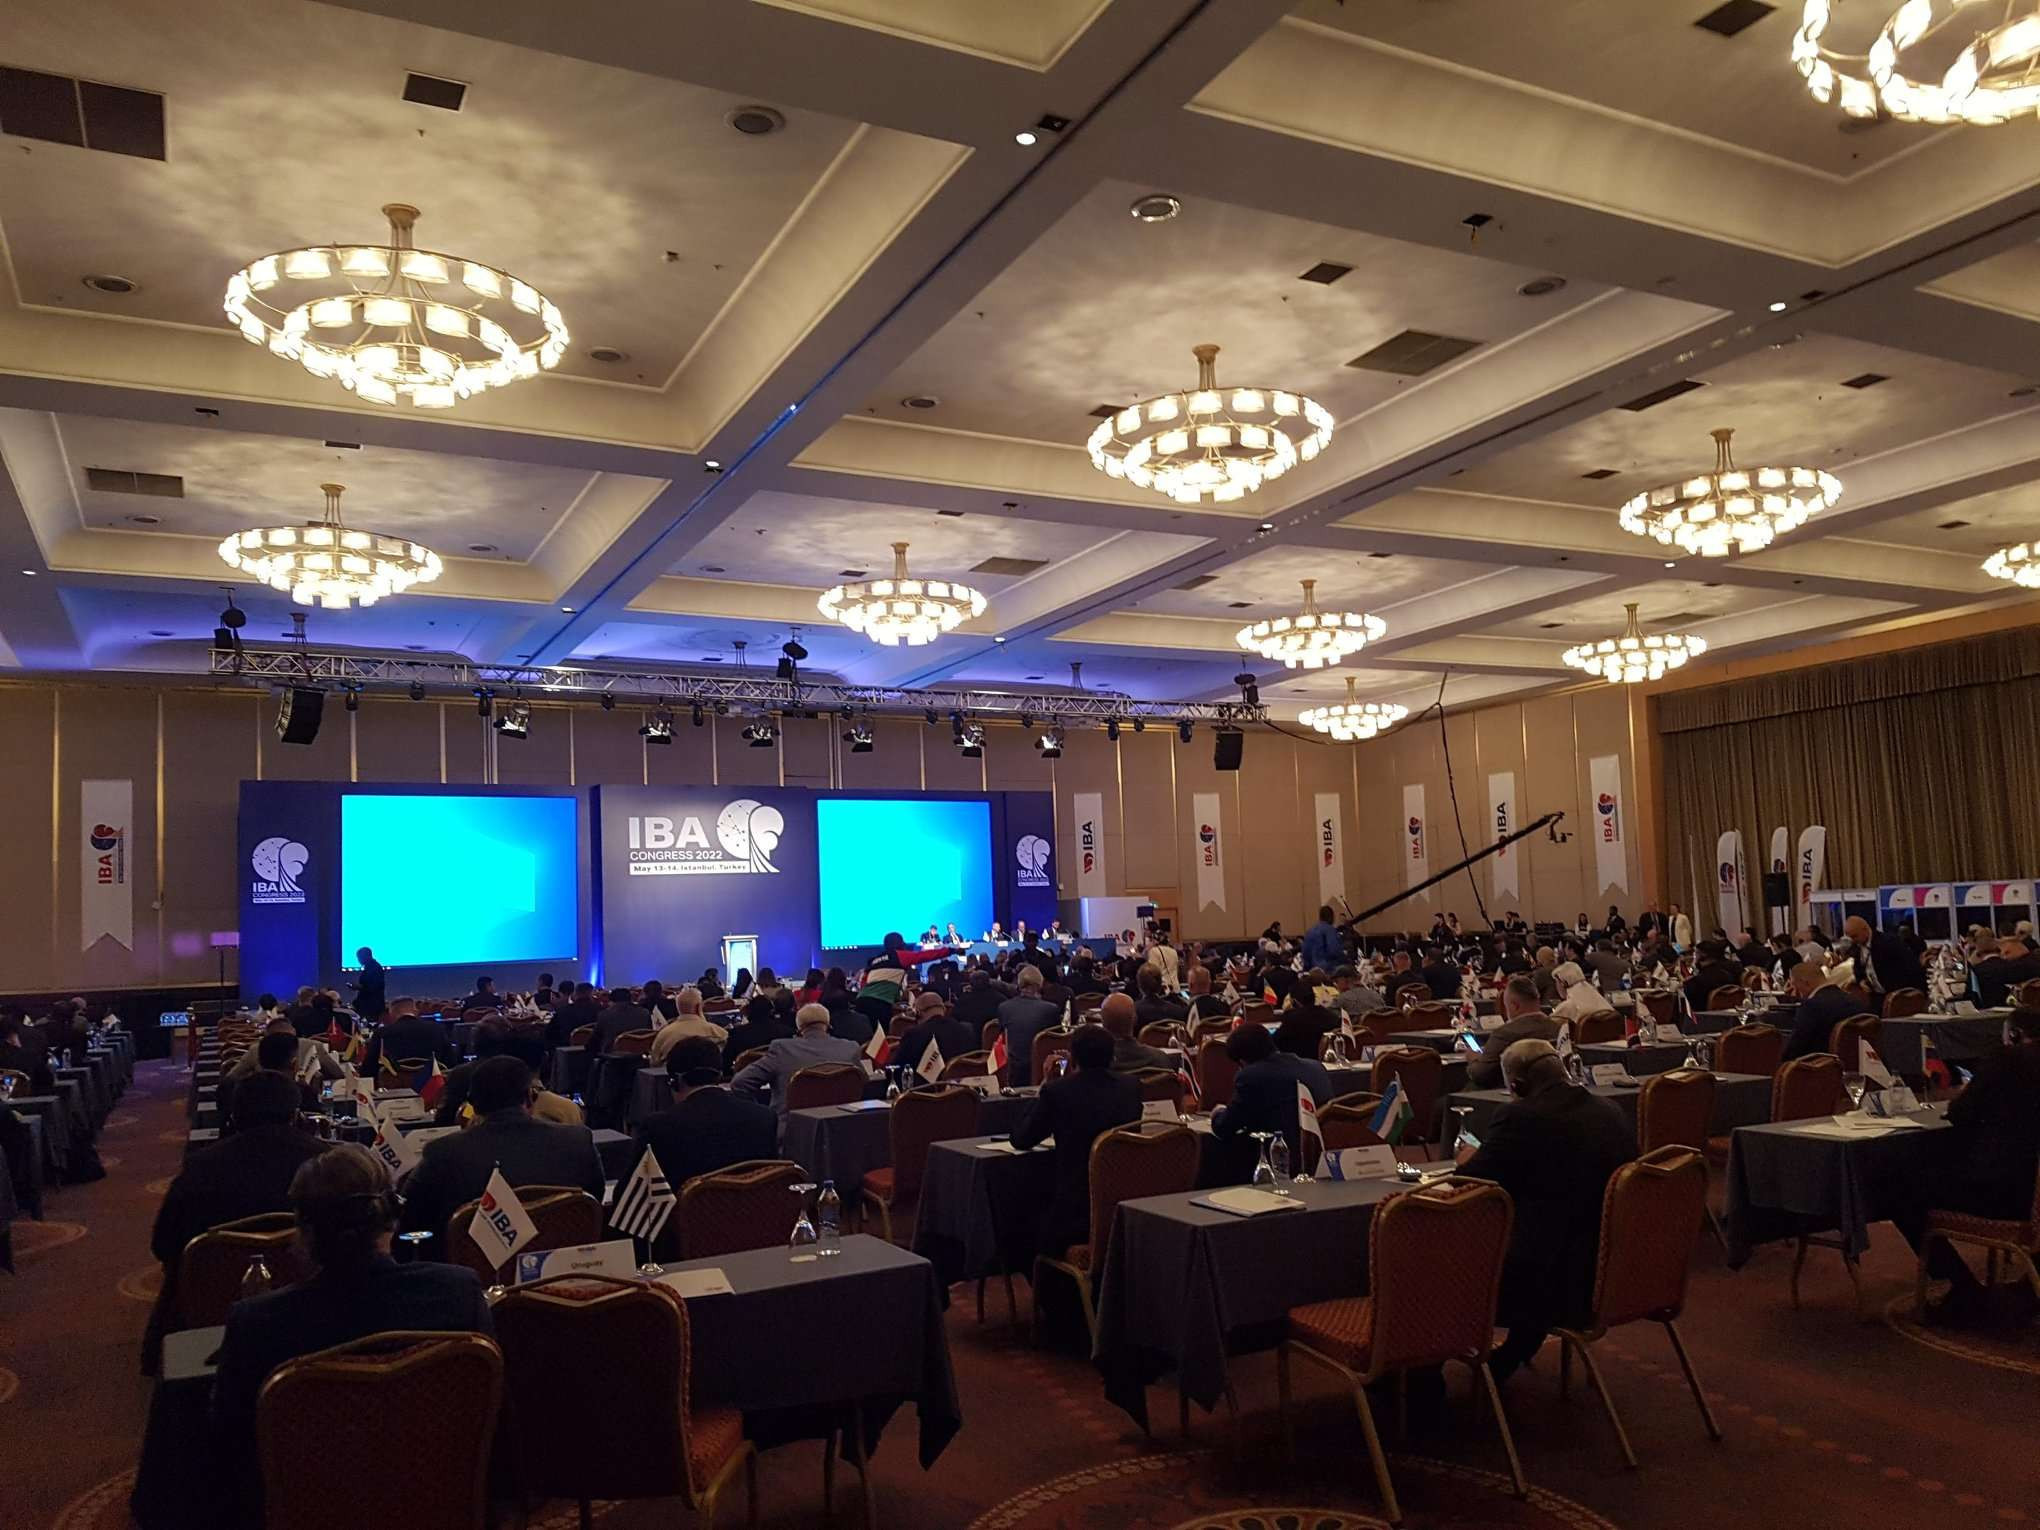 insidethegames is reporting LIVE from the IBA Extraordinary Congress